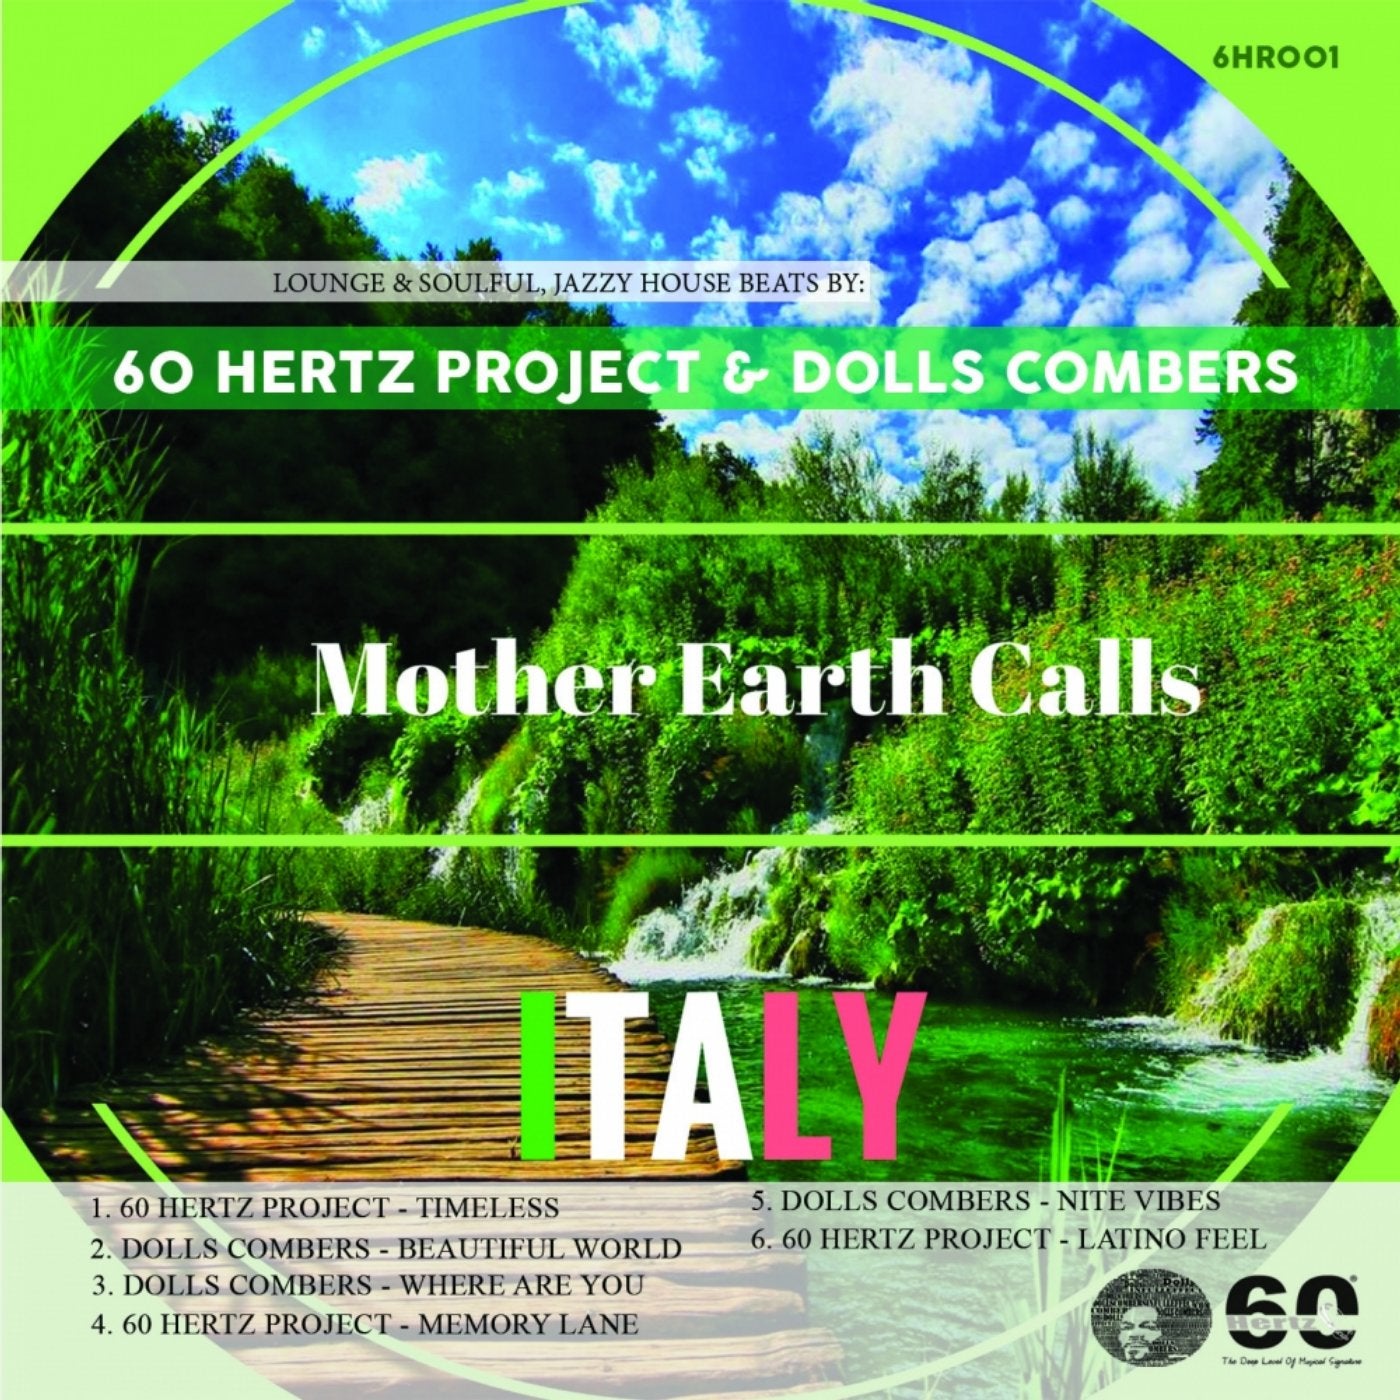 Mother Earth Calls Italy EP